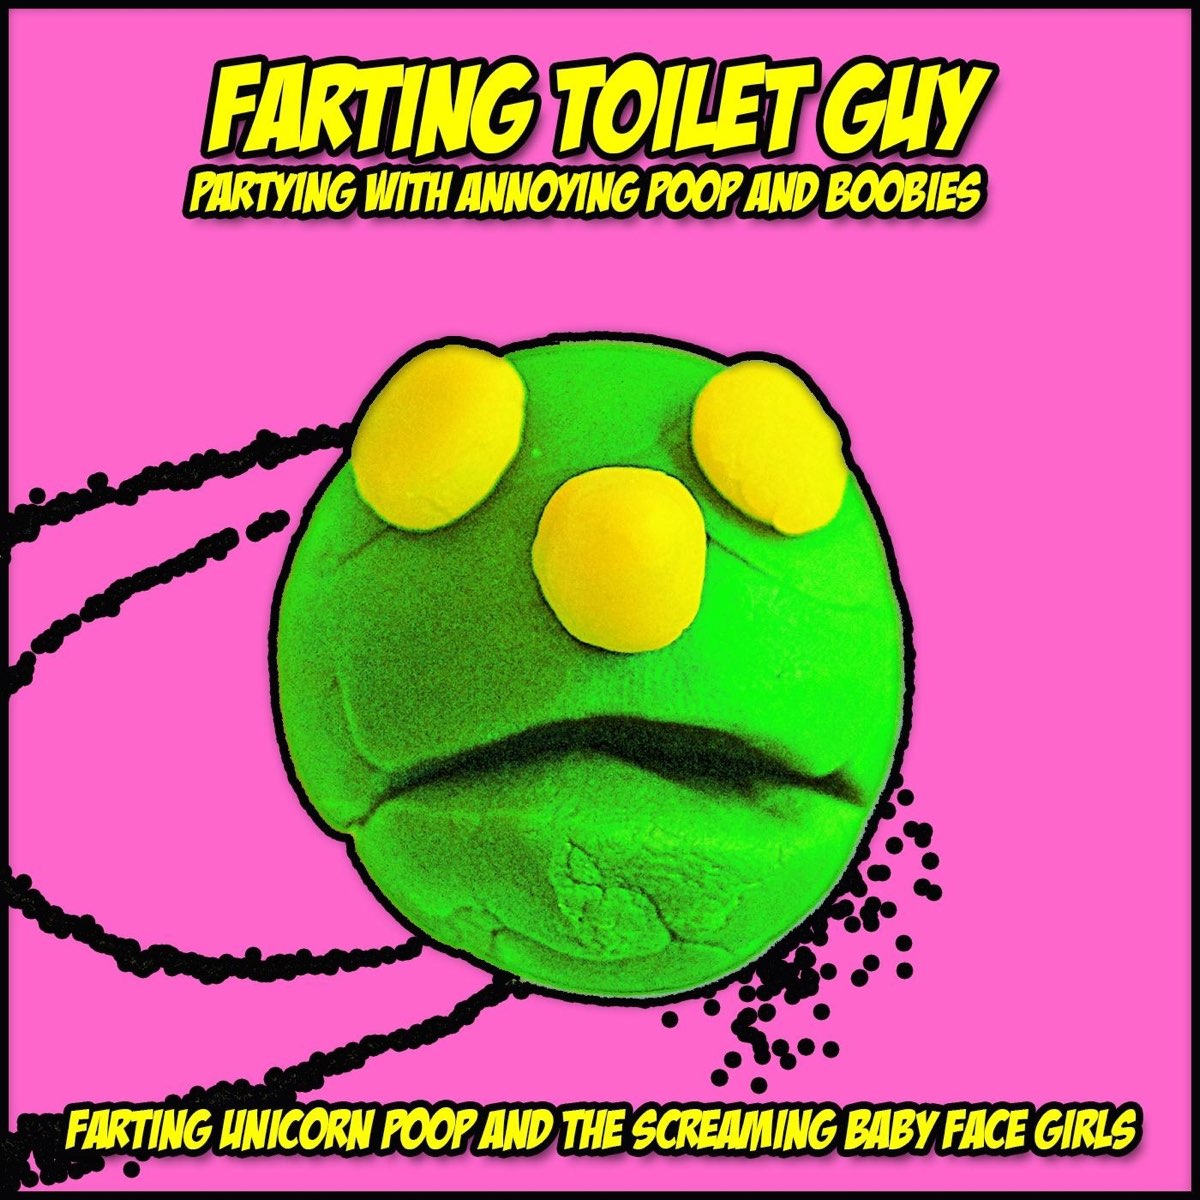 Bathroom Black Mail Teen Fuck - Farting Unicorn Poop and the Screaming Baby Face Girls - Album di Farting  Toilet Guy Partying with Annoying Poop and Boobies - Apple Music